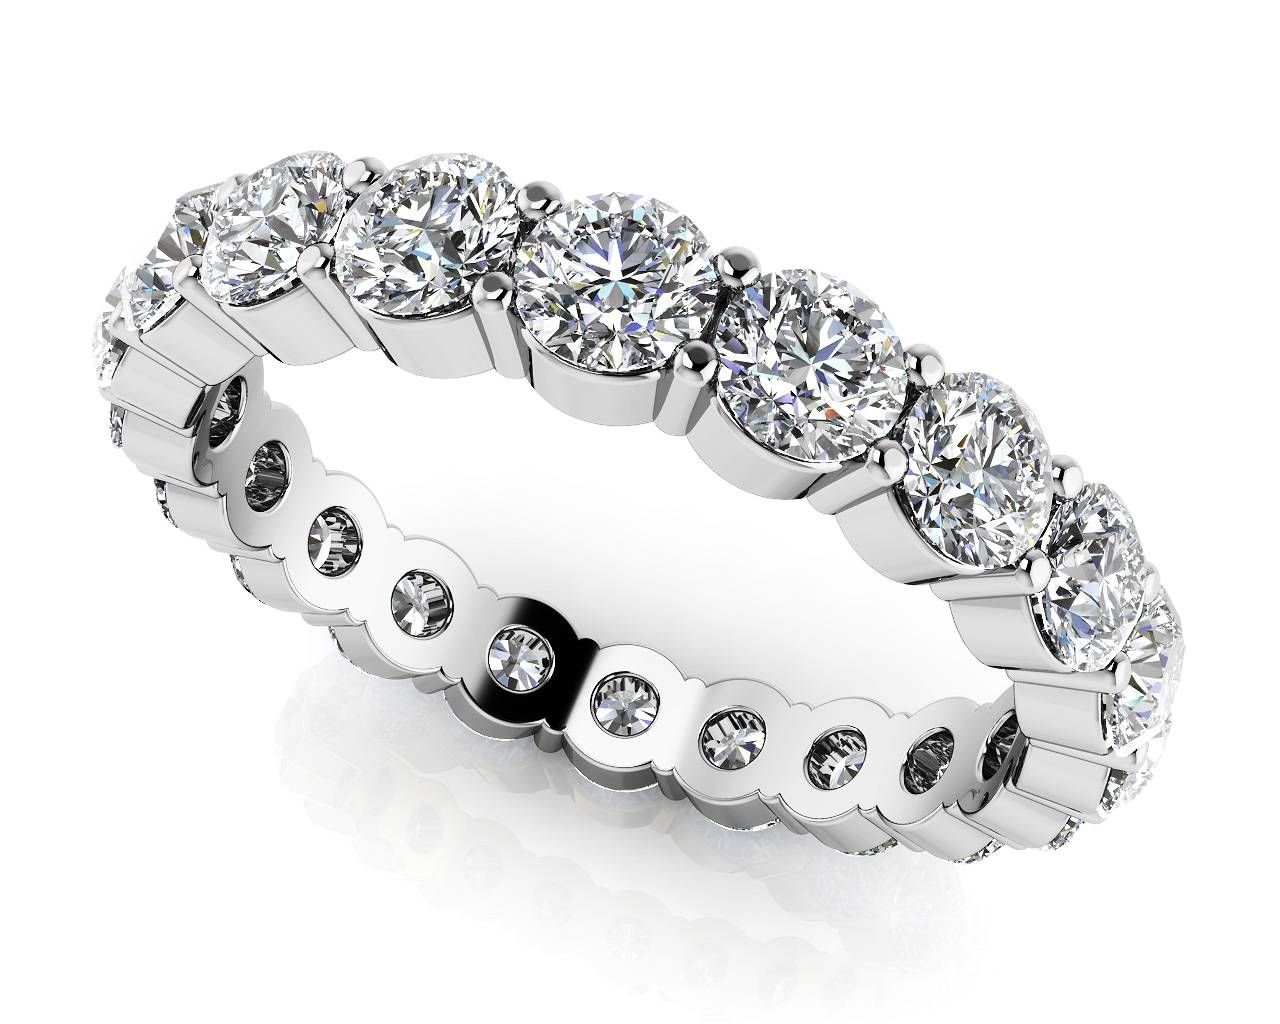 Design Your Own Diamond Anniversary Ring & Eternity Ring Regarding Current Ten Year Anniversary Rings (View 15 of 25)